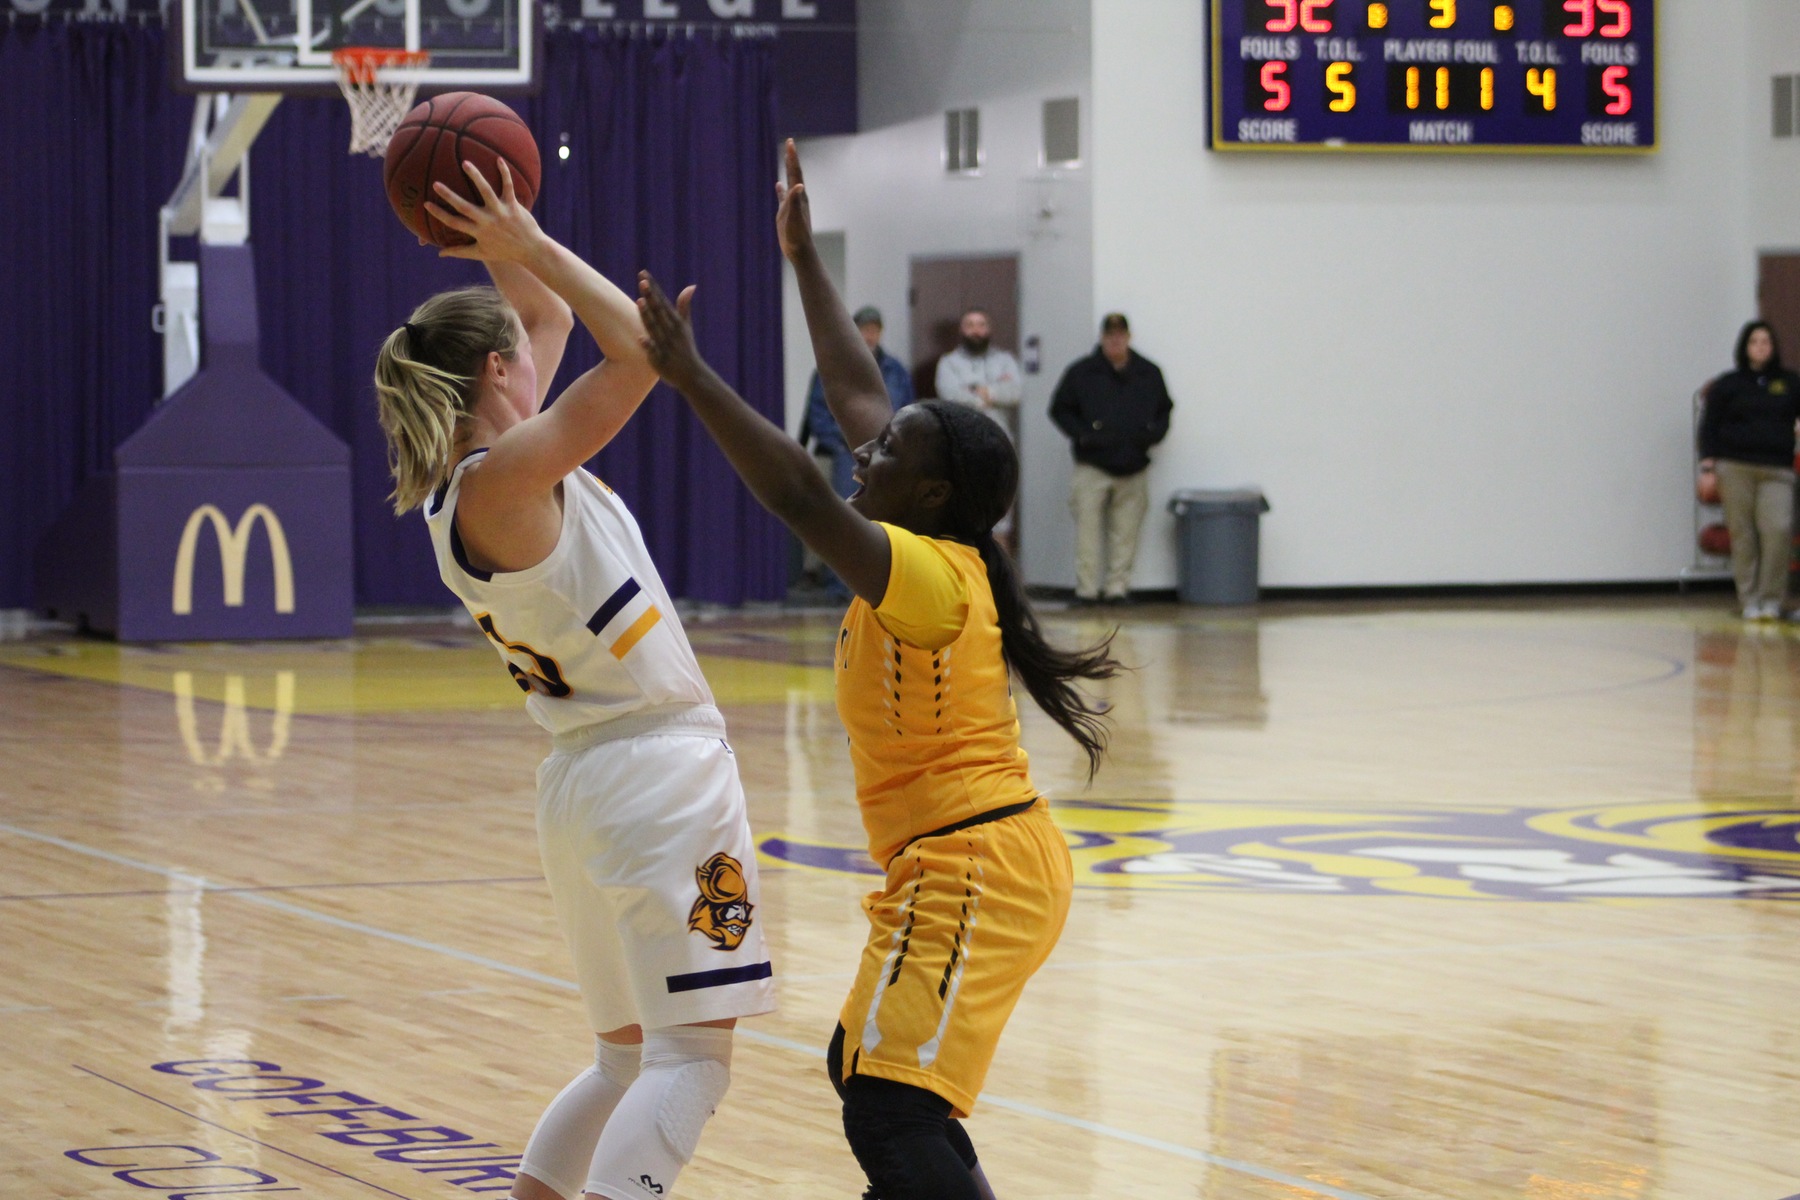 Dodge City comes from behind to clip the Broncbusters